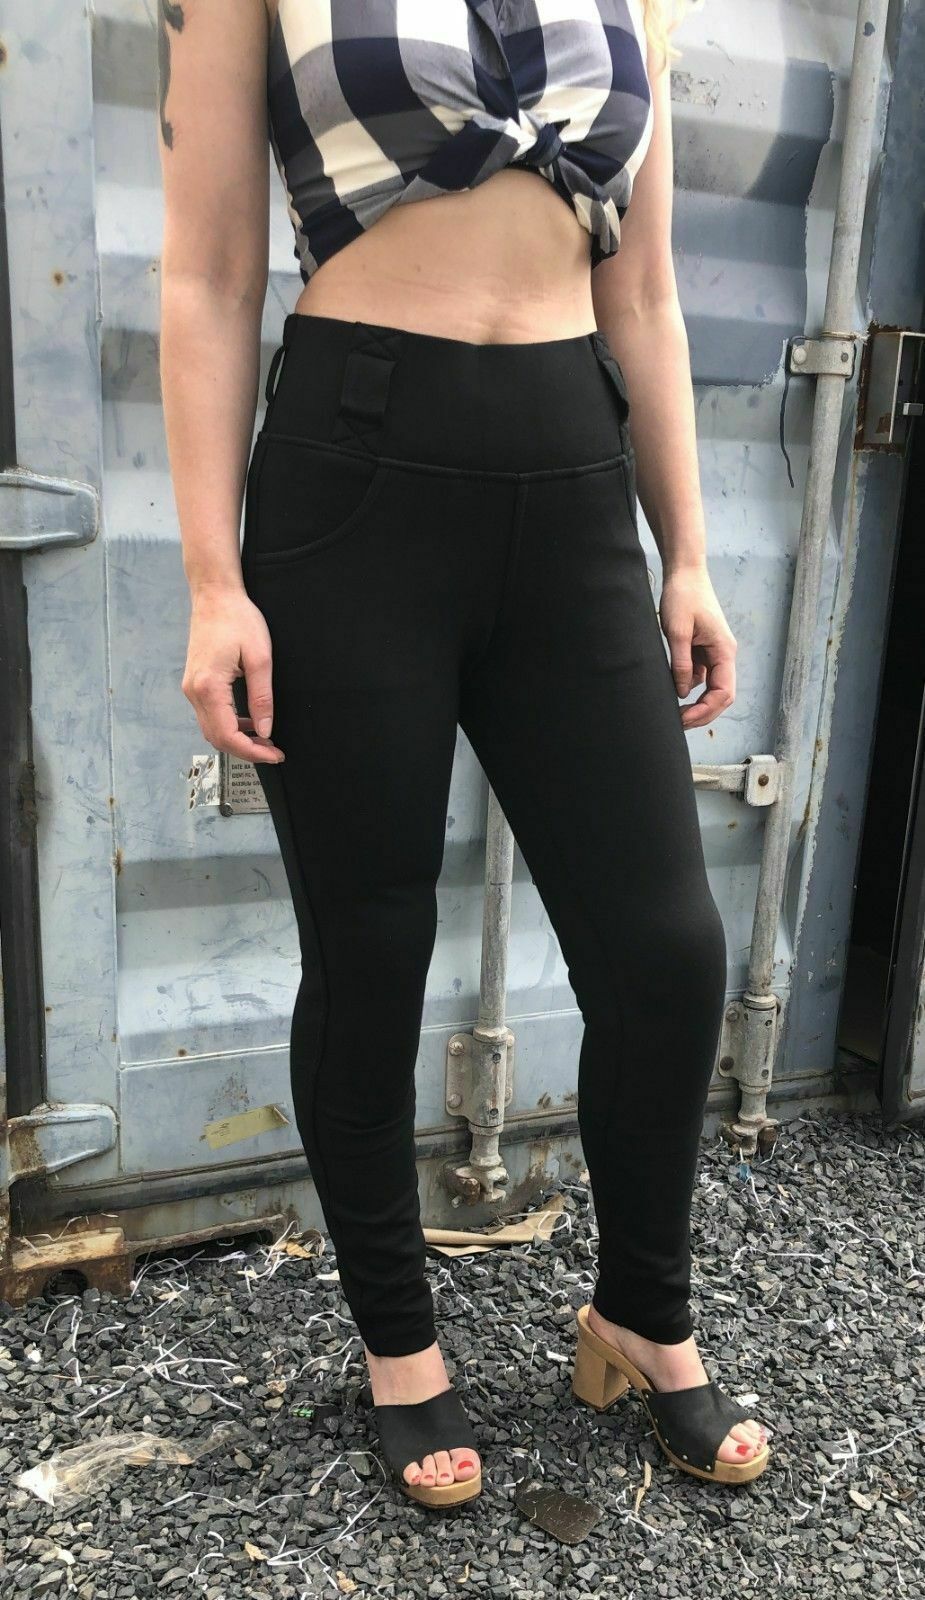 Harley Davidson Leggings And Tank Top Set  International Society of  Precision Agriculture